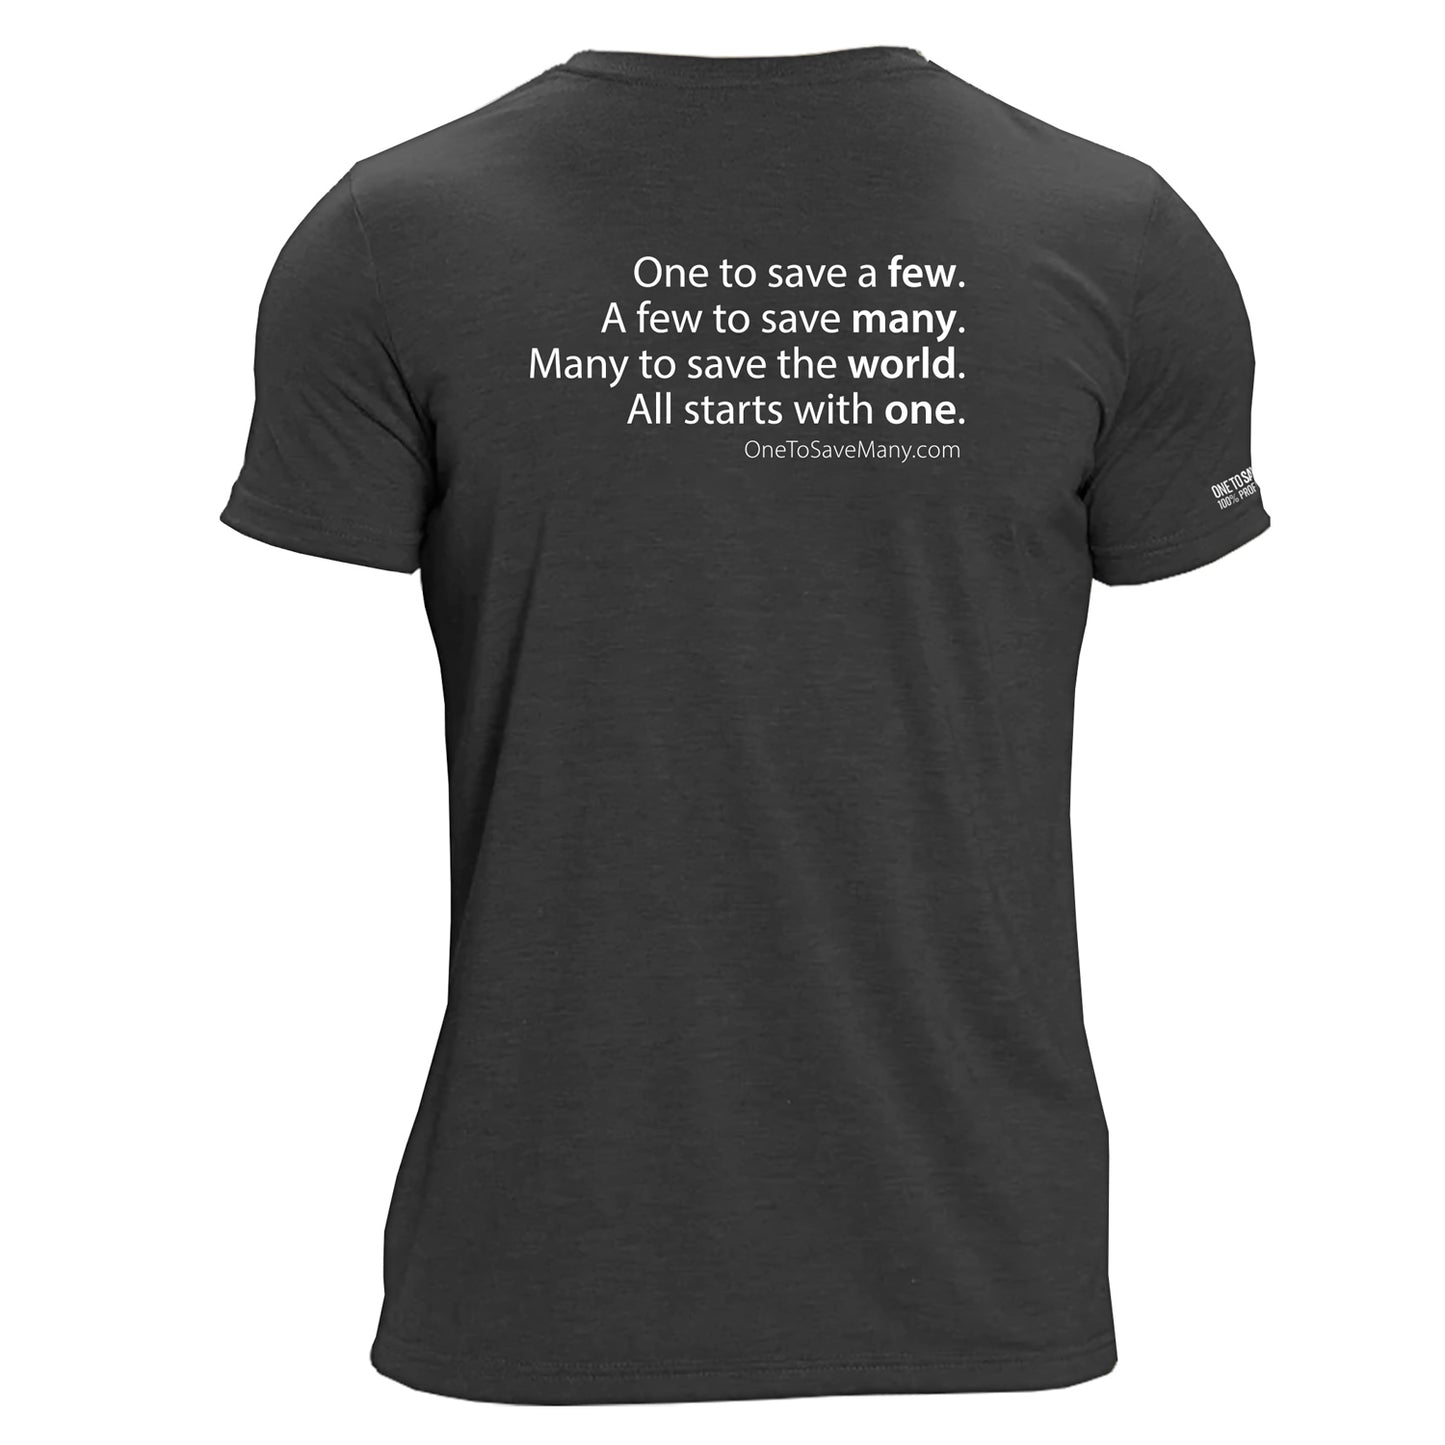 One to Save Many Quote - Unisex Tri-Blend Black T-Shirt - 100% for Charity!